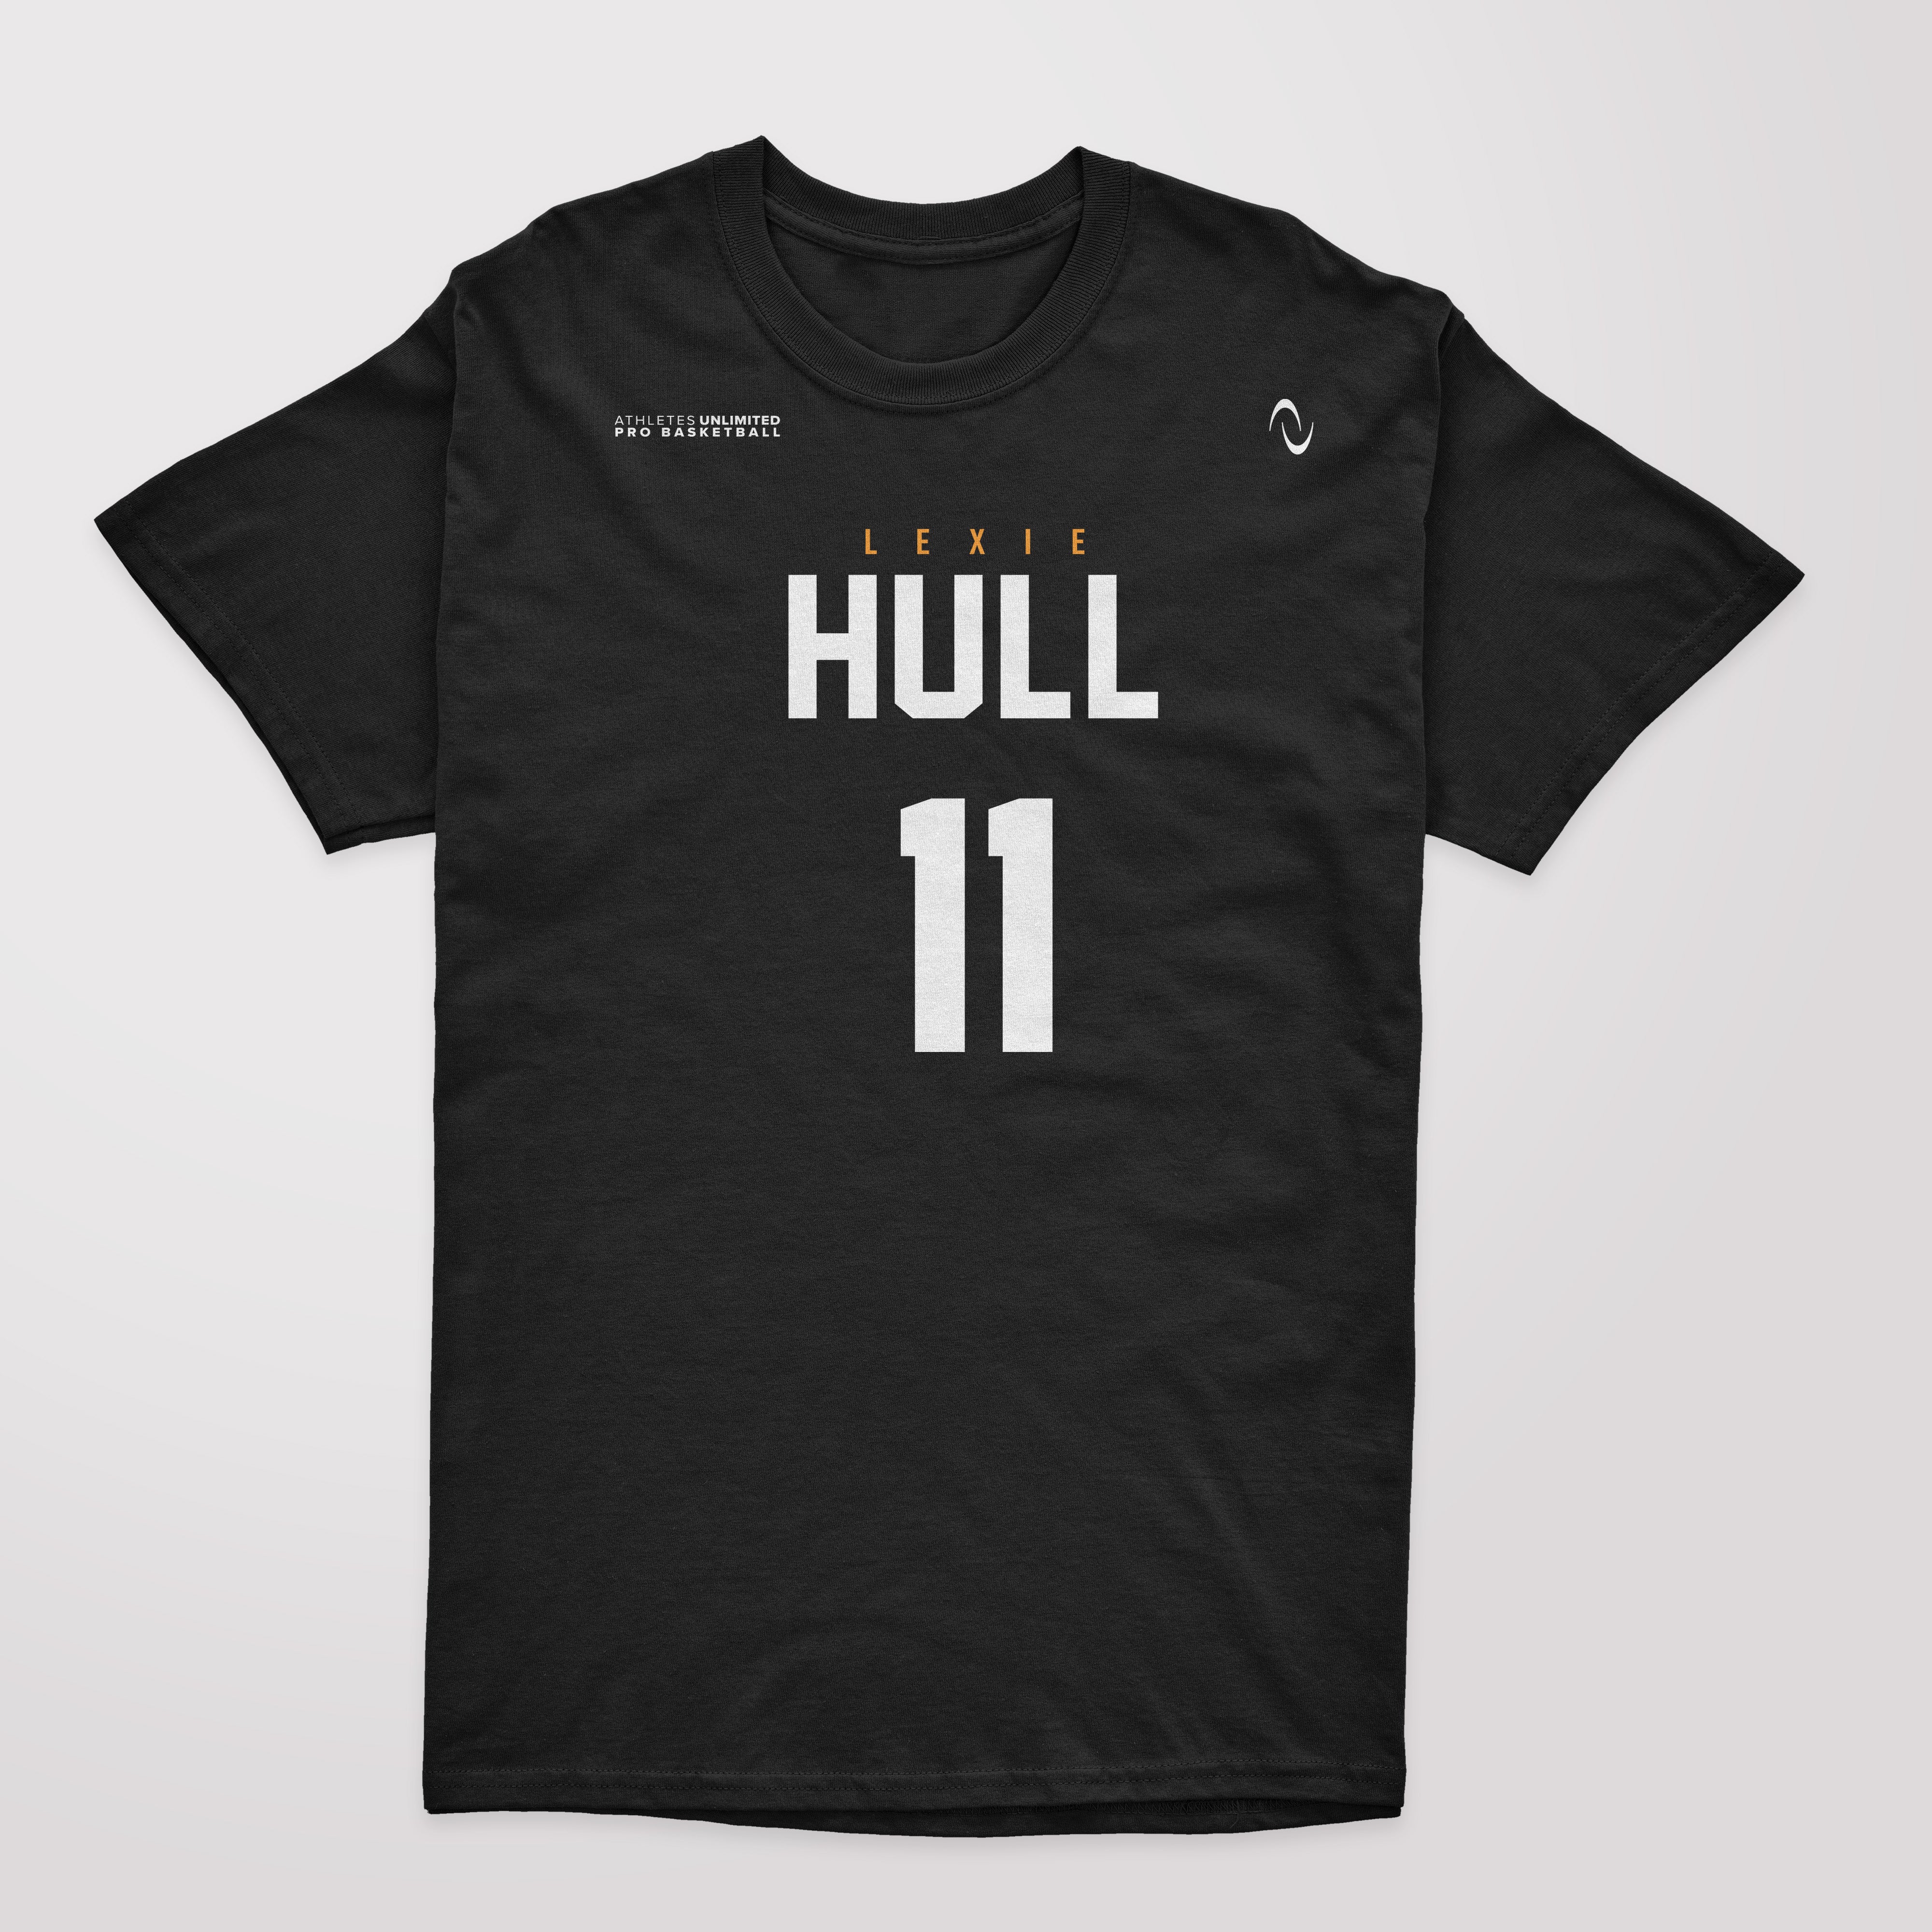 Athletes Unlimited Basketball Player Name and Number Tee, Lexie Hull 11